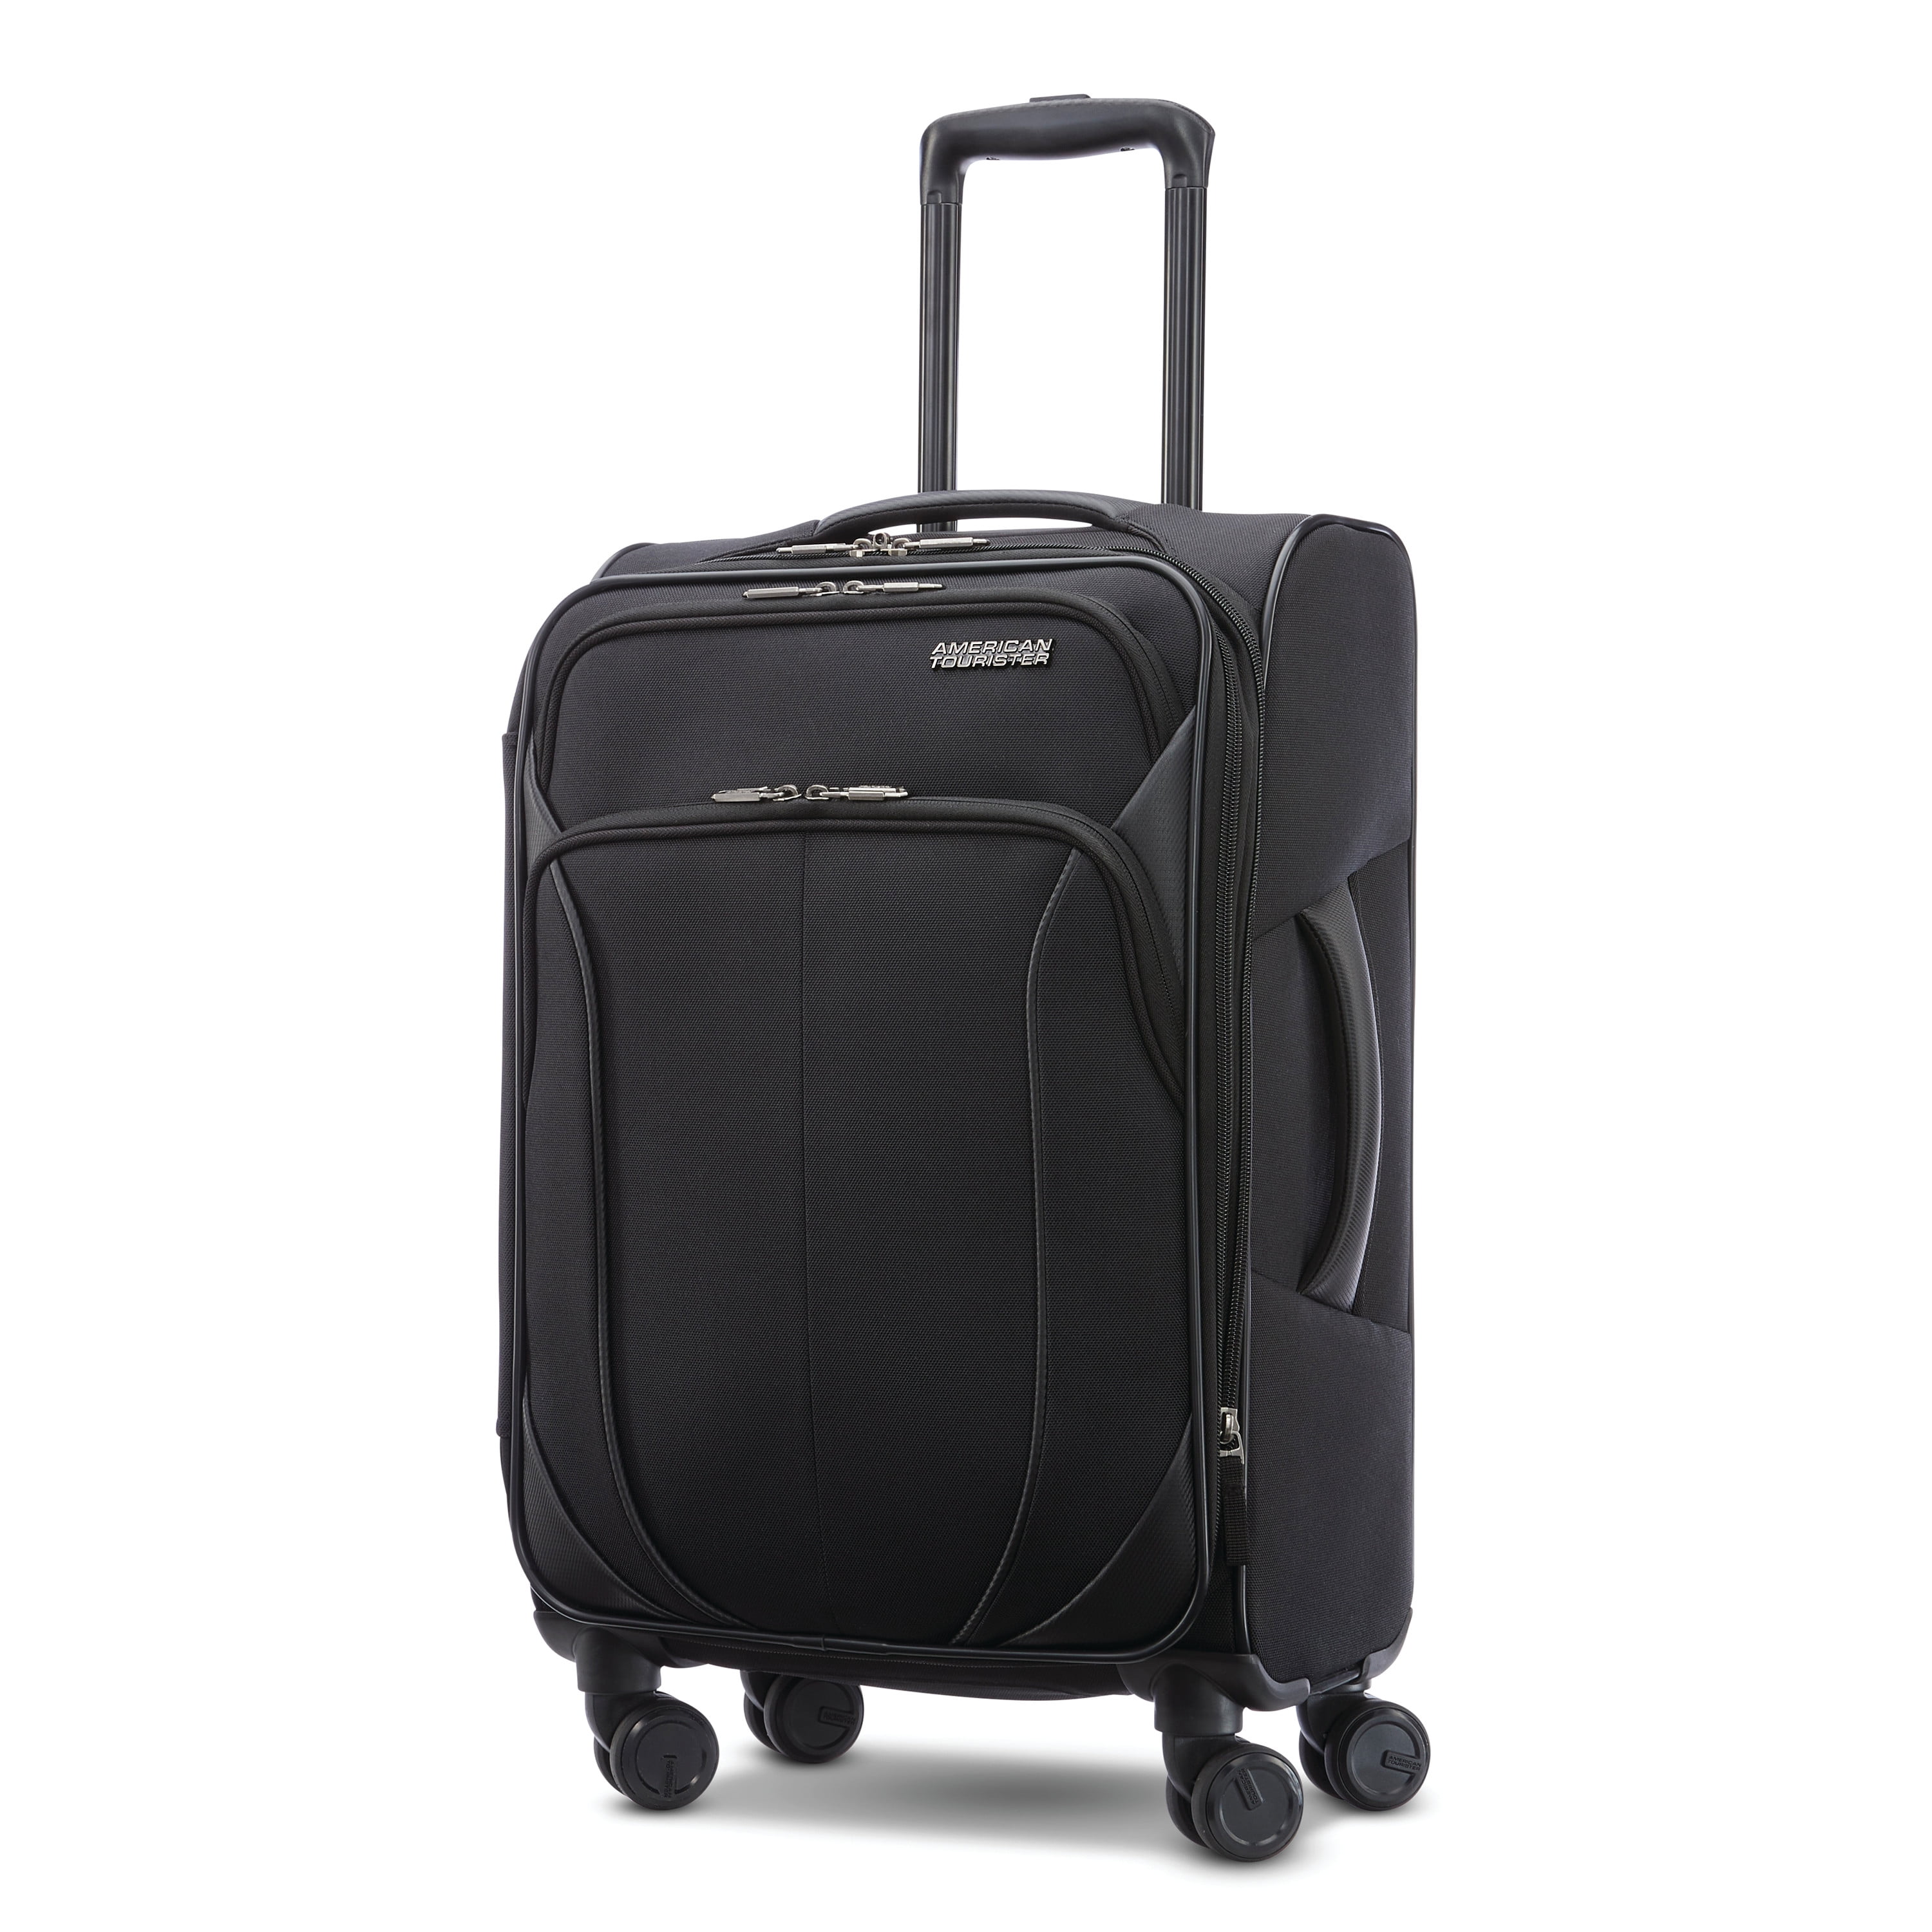 American Tourister 4 KIX 2.0 20 Carry-on Spinner Luggage 